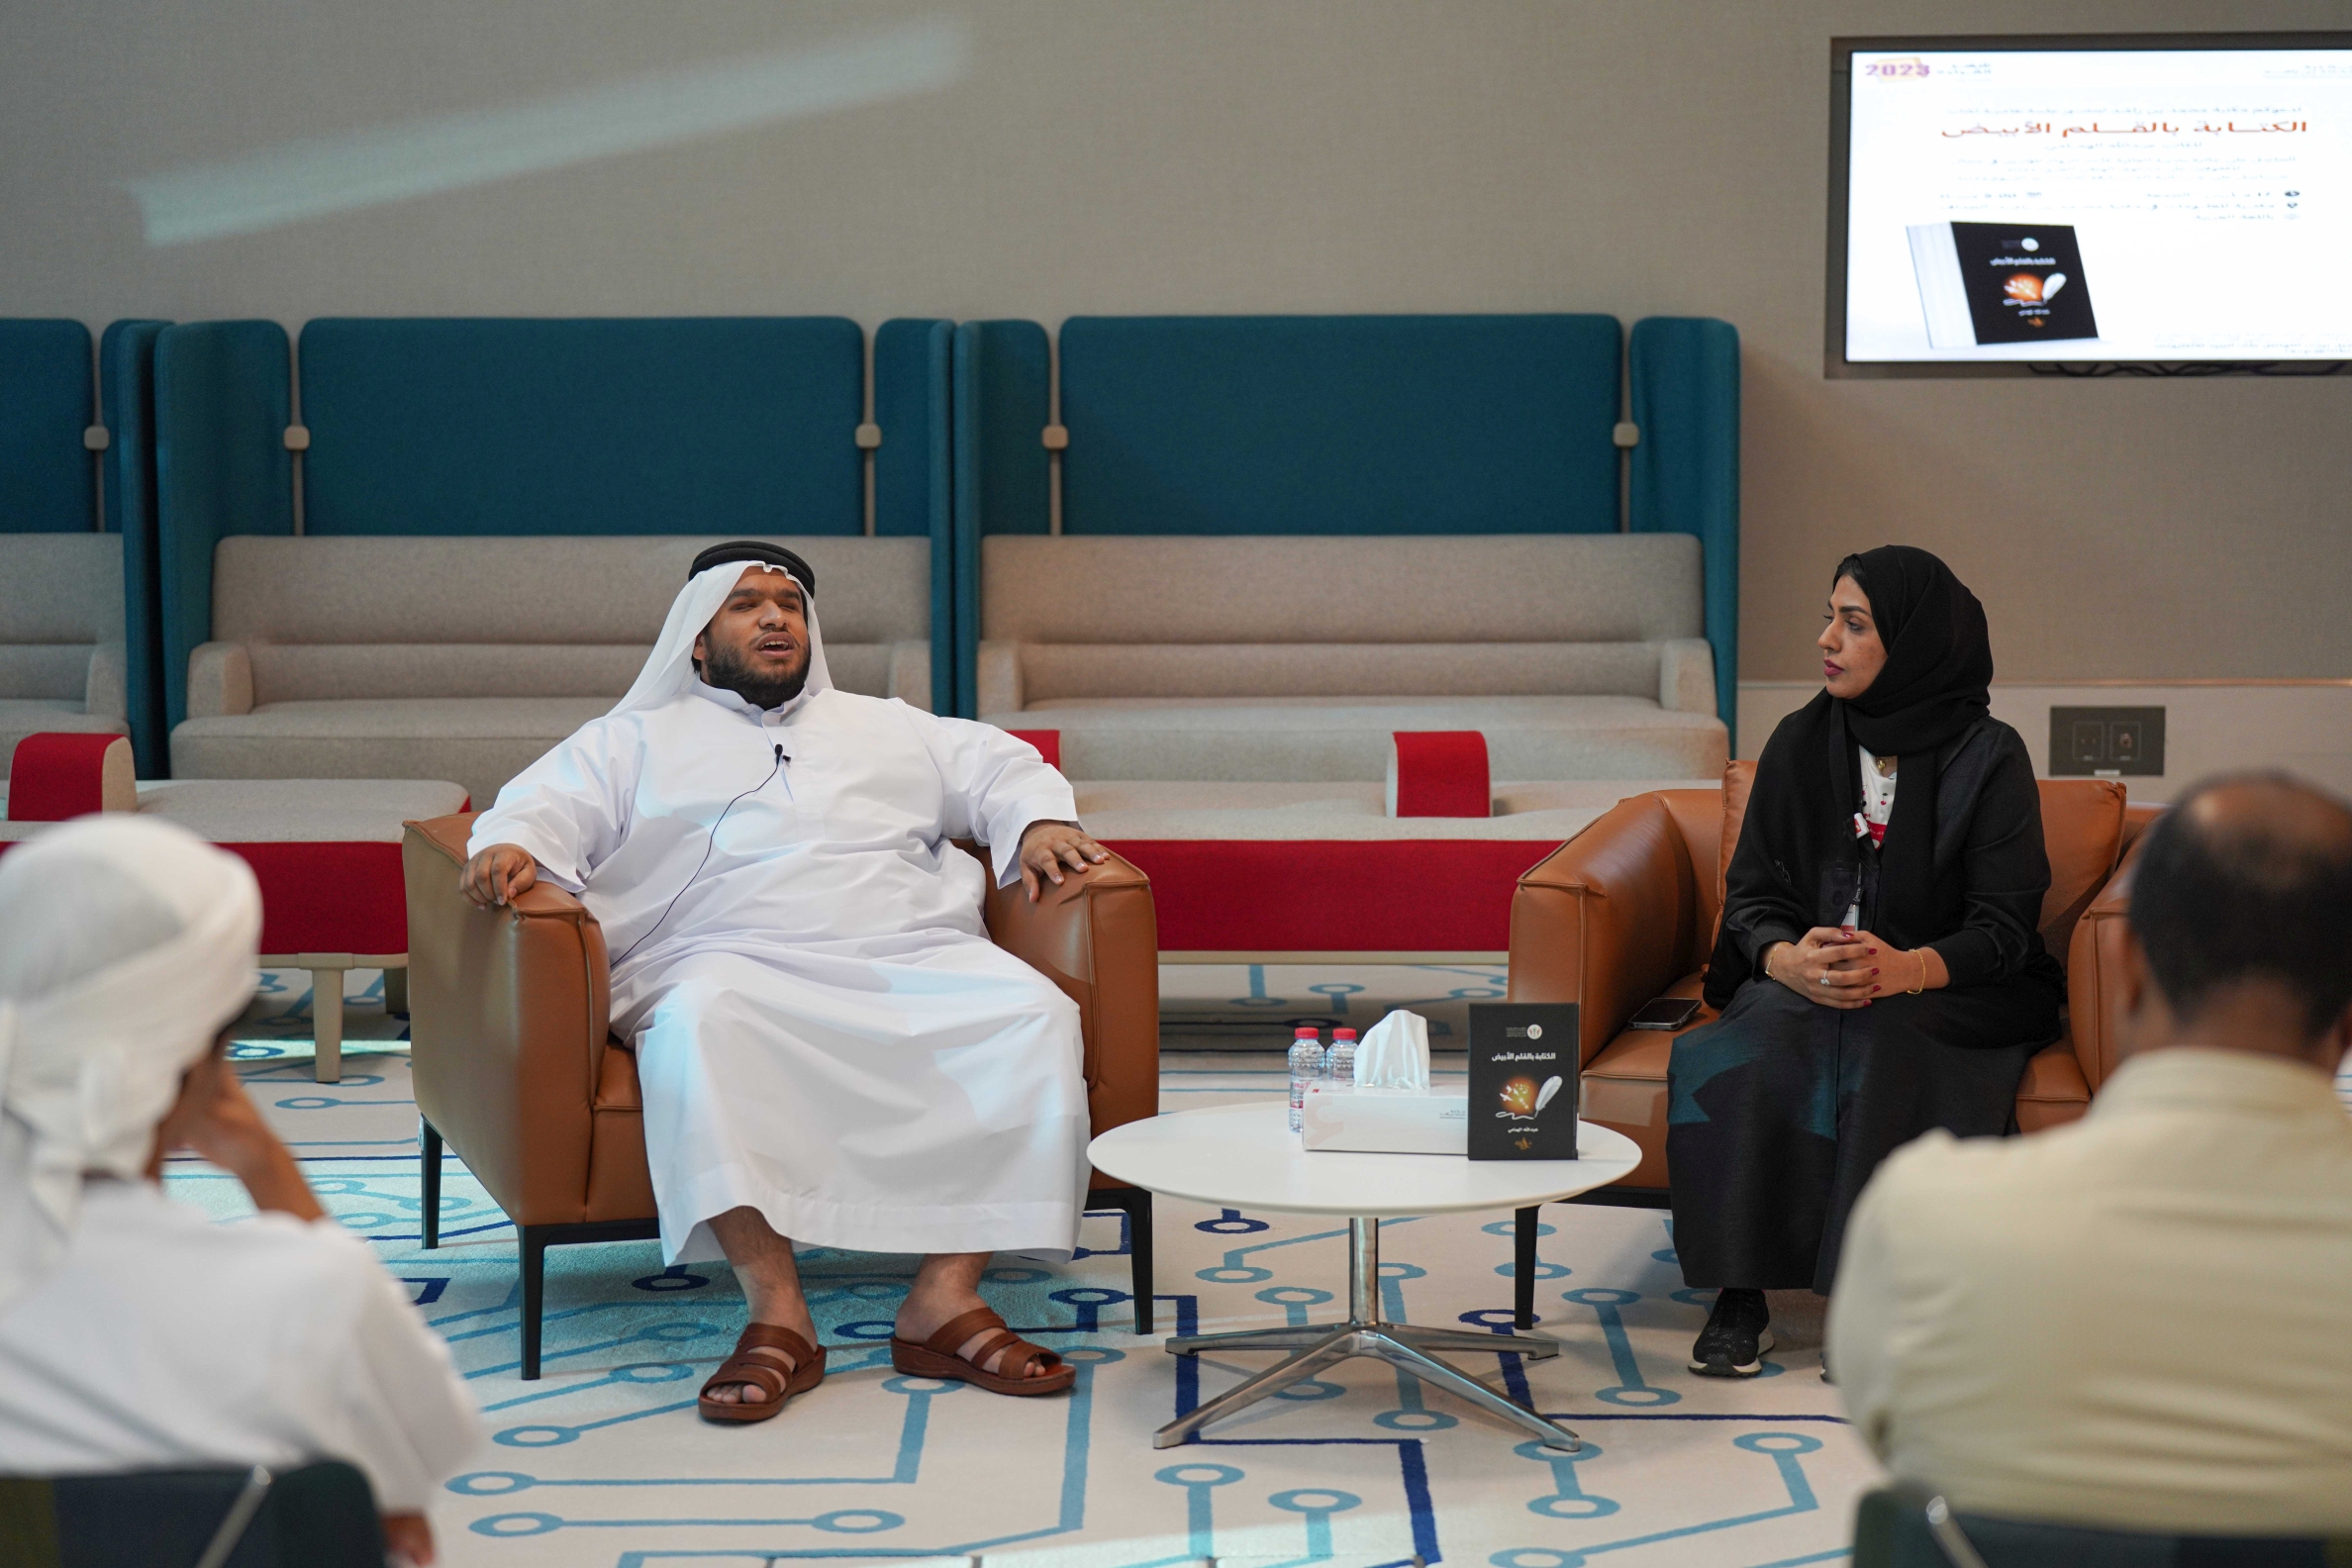 Mohammed bin Rashid Library organises the ‘Writing with a White Pen’ panel discussion with Emirati writer Abdullah Alhumami